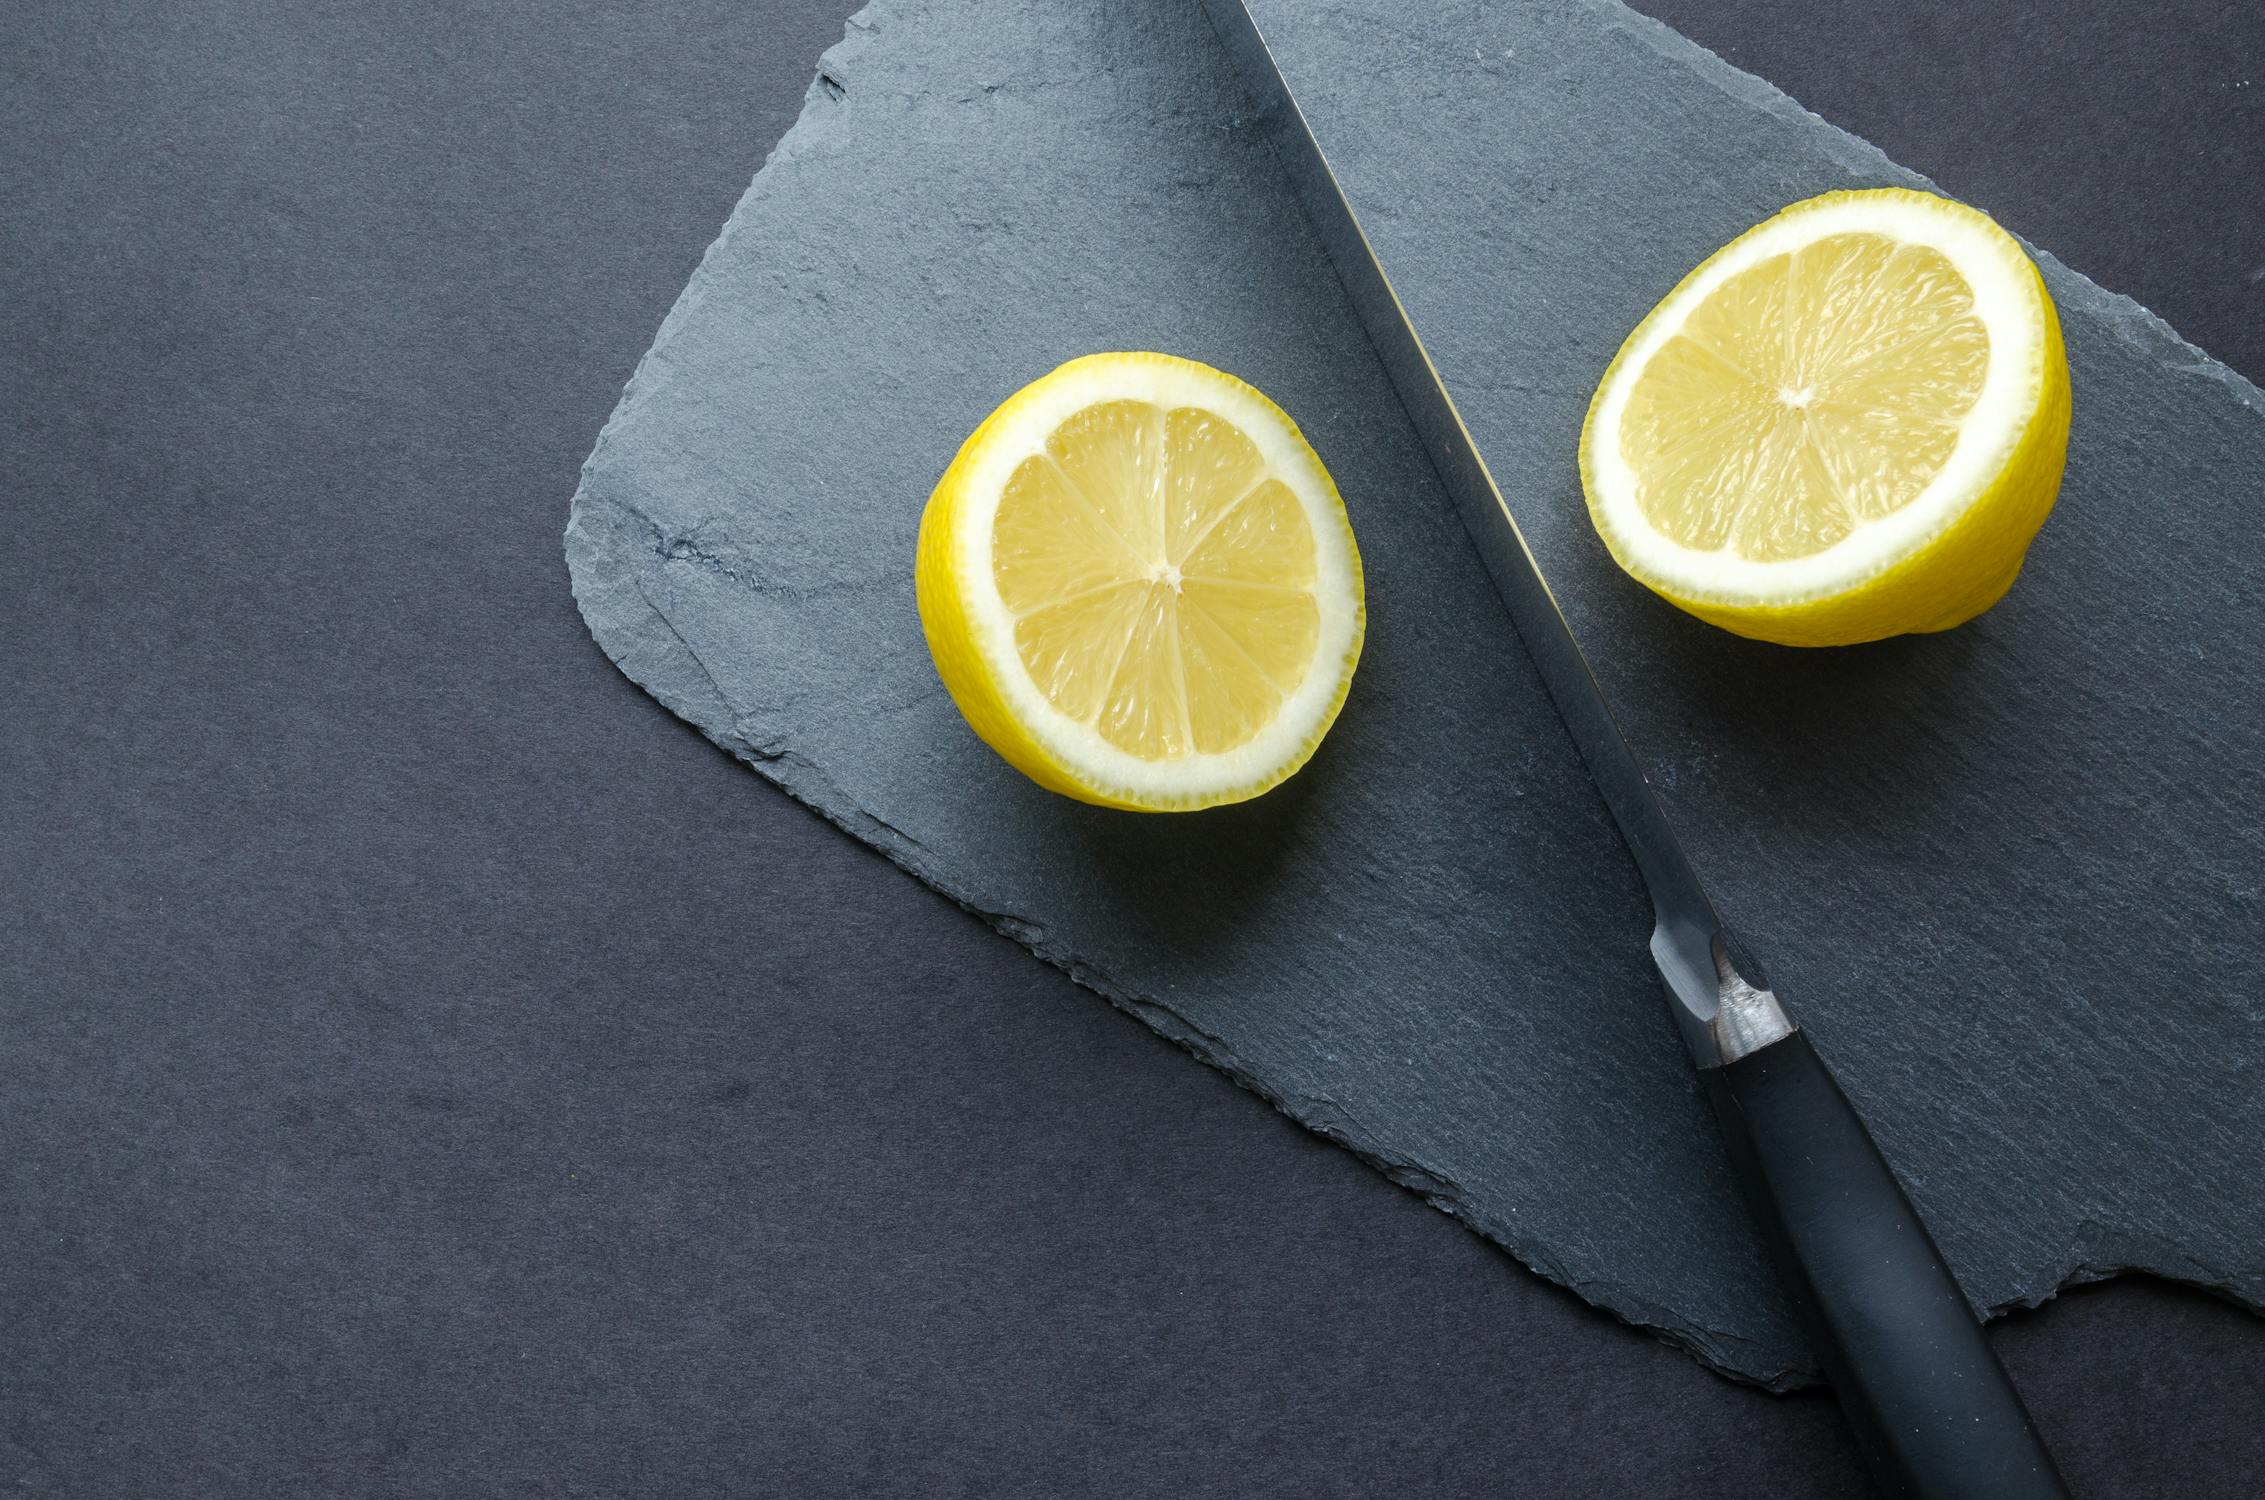 sliced lemon on gray surface with a knife